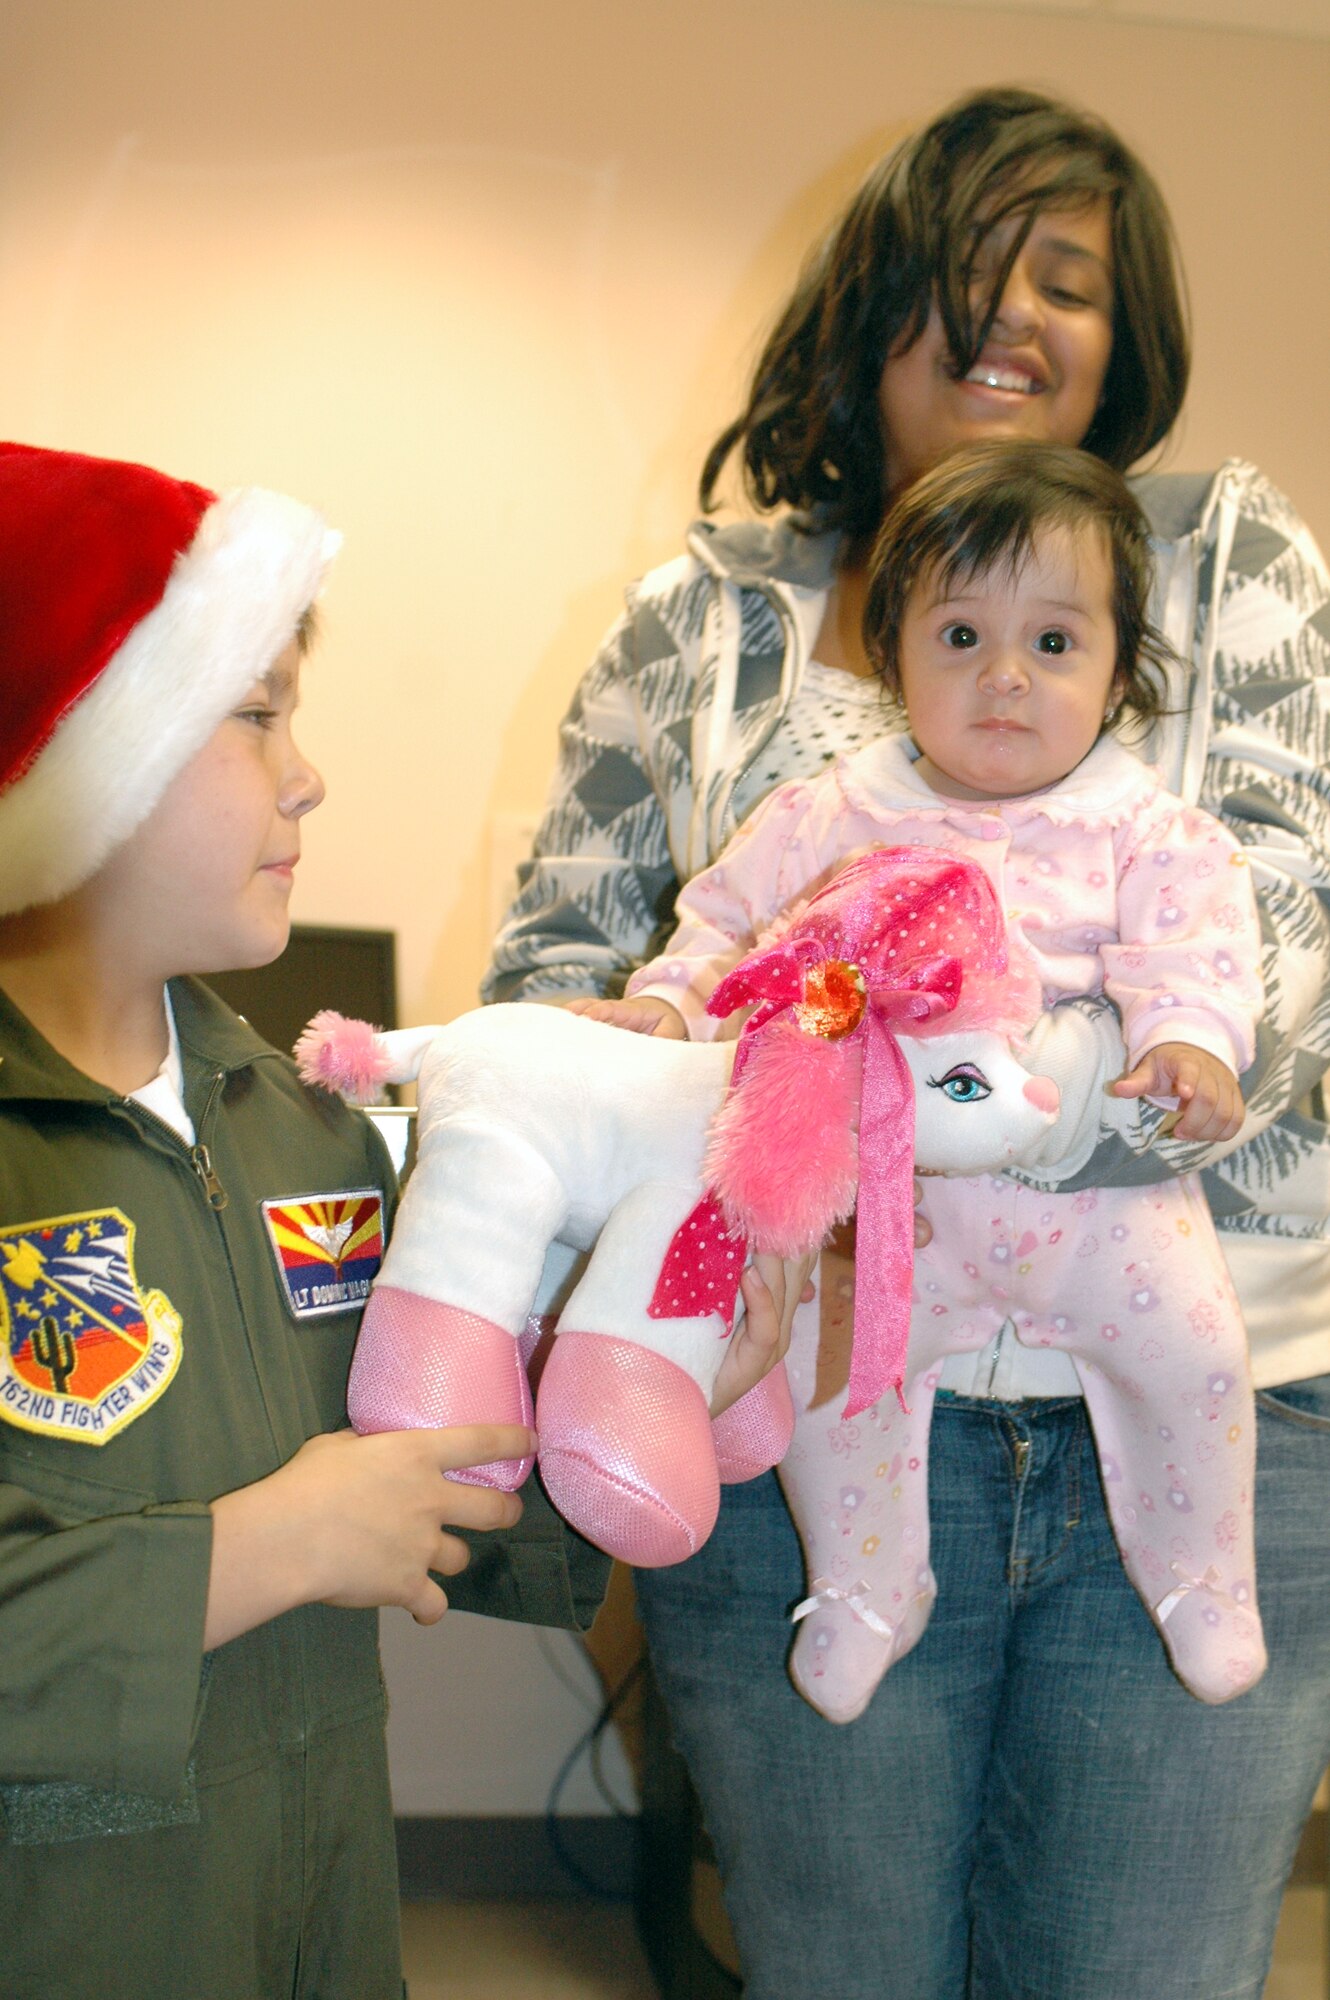 PHOENIX – Honorary 162nd Fighter Wing member Dominic Magne, 7, gives a stuffed animal to a baby at Phoenix Children’s Hospital Dec. 11. The Tucson-based Guard unit held a gift drive in November and December resulting in more than 250 toys, games, books and DVDs. Every child received a gift with extras donated to the hospital for future patients. (Air National Guard photo by Capt. Gabe Johnson)